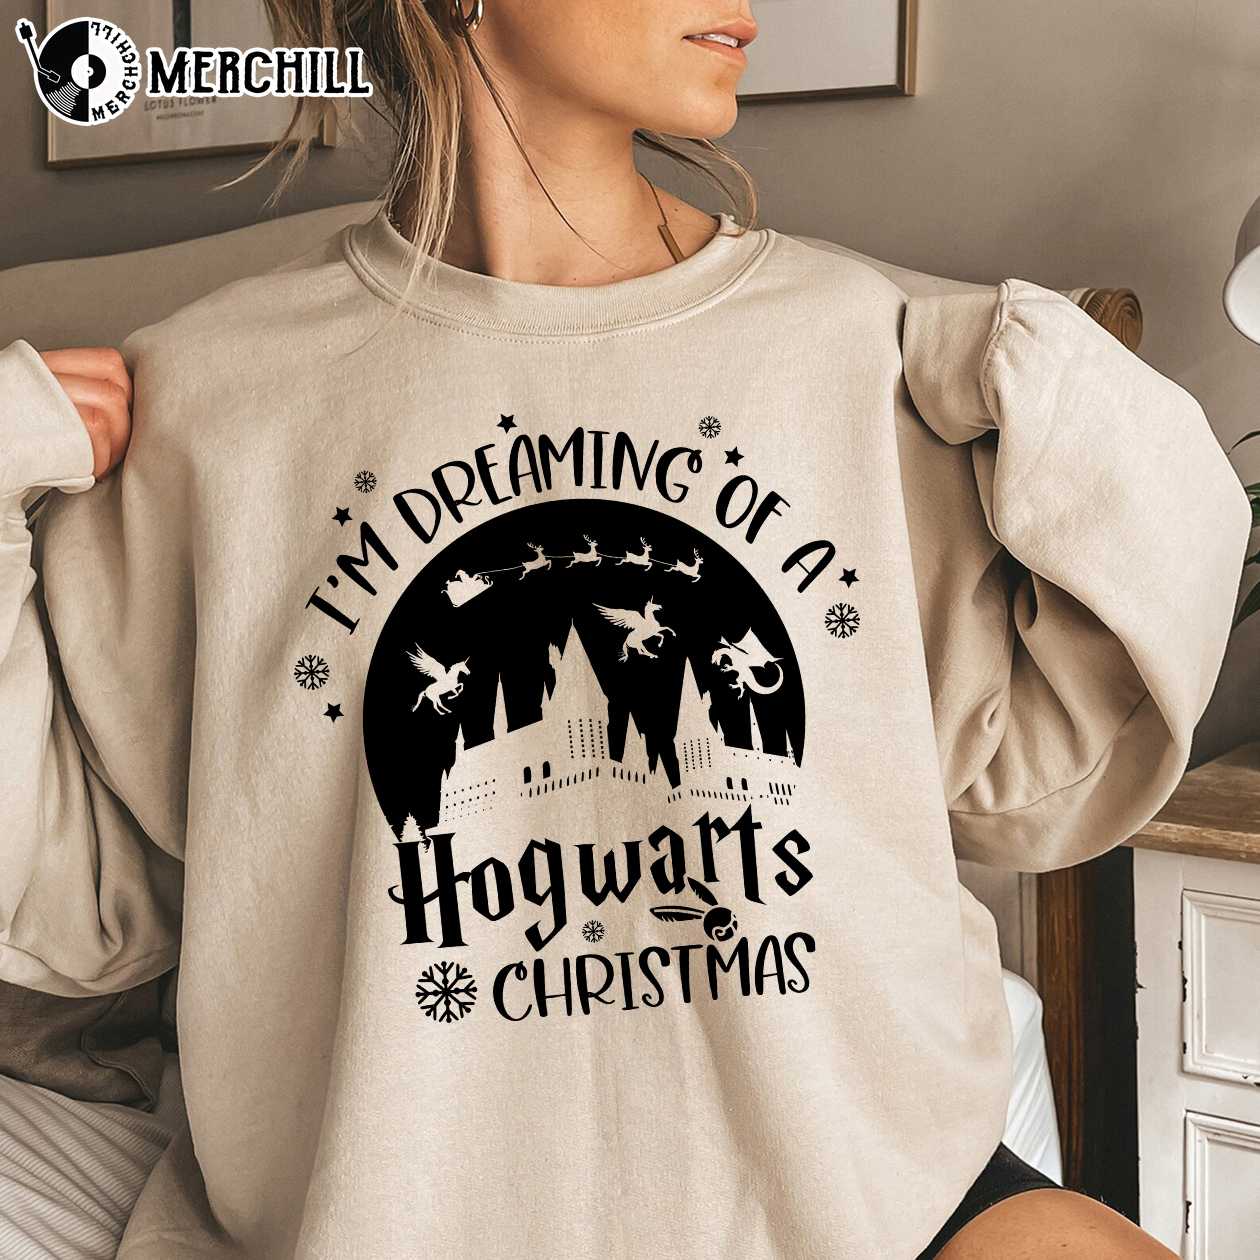 Potter Gryffindor Shirt Womens Gifts for Harry Potter Lovers - Happy Place  for Music Lovers